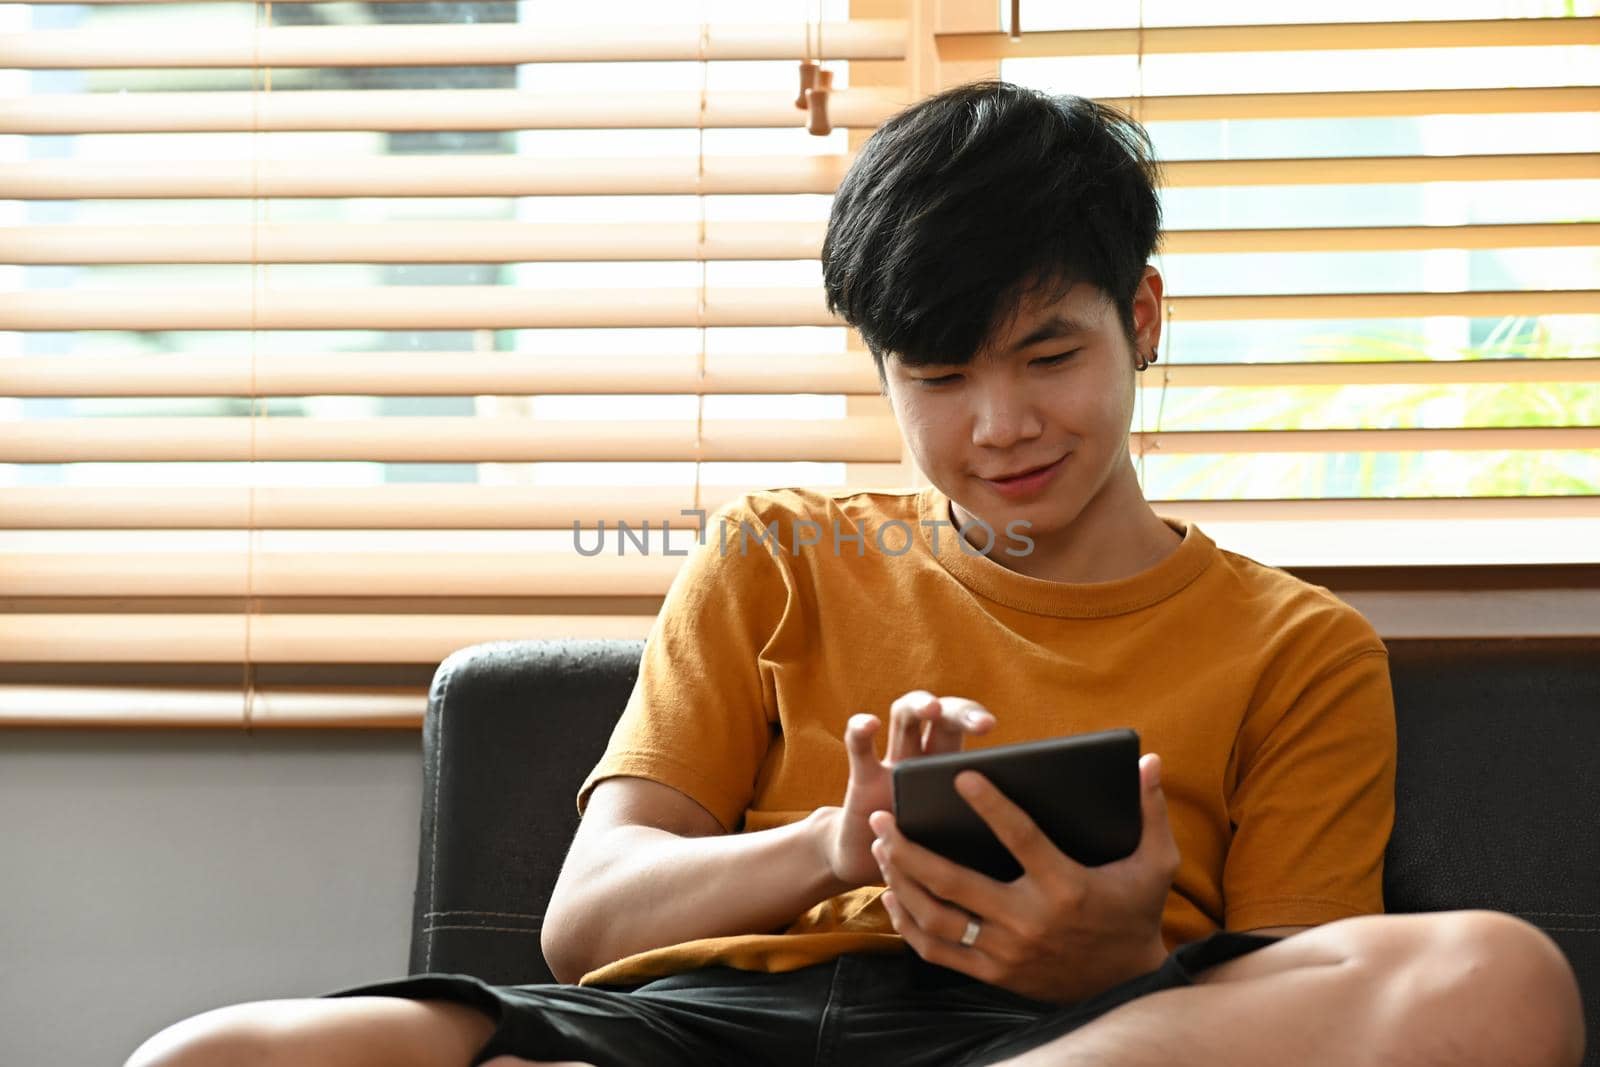 Smiling casual man sitting on couch and using digital tablet. by prathanchorruangsak